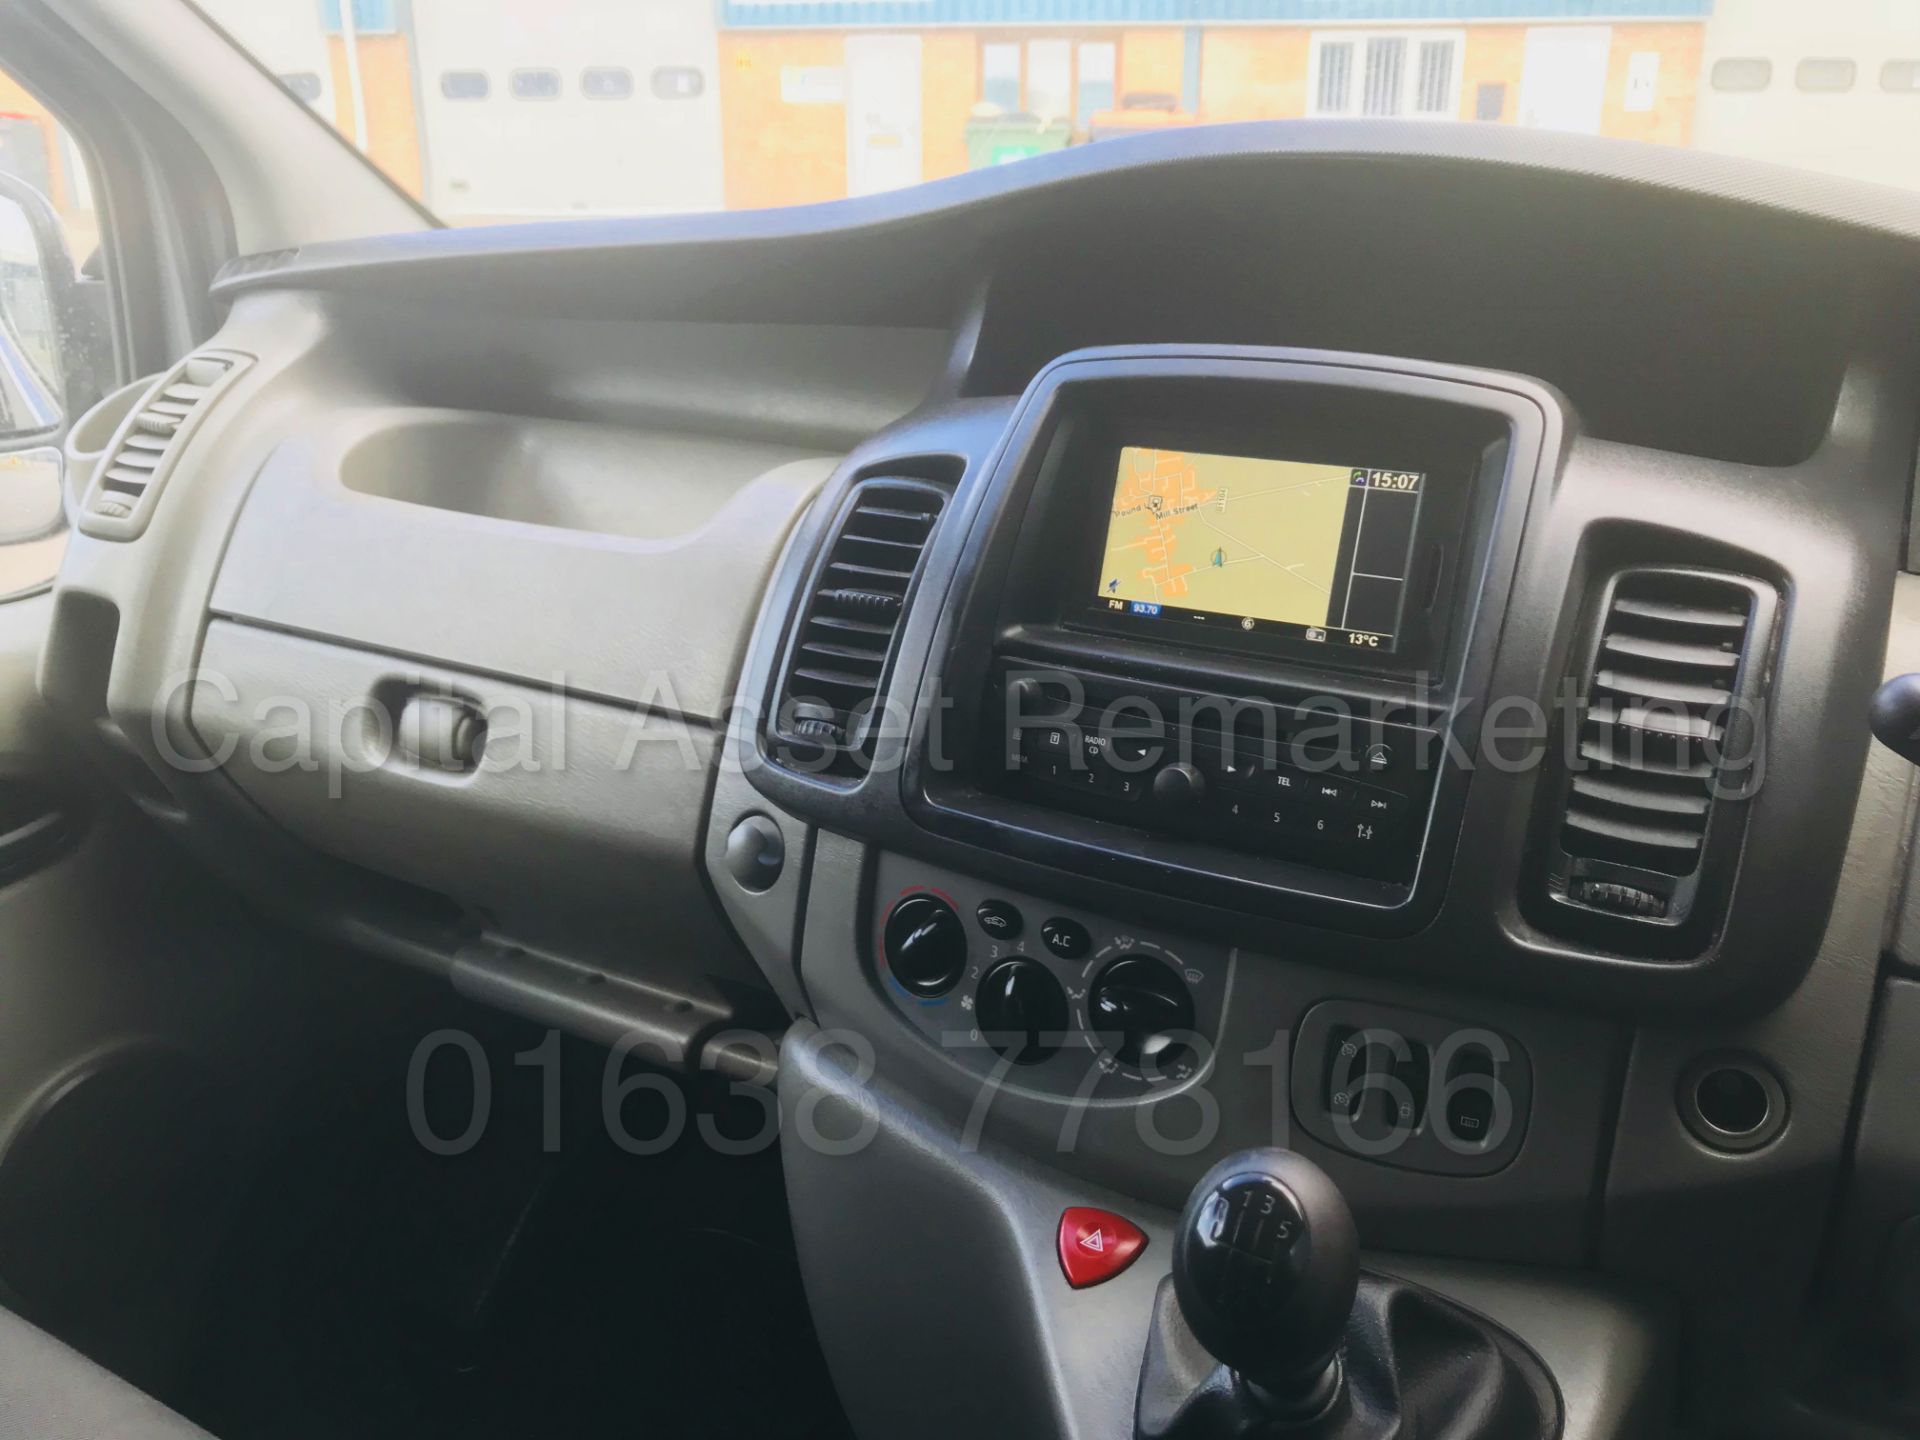 (On Sale) RENAULT TRAFIC 'SPORT EDITION' LWB (2014) '2.0 DCI - 115 BHP - 6 SPEED' *AIR CON* (NO VAT) - Image 28 of 40